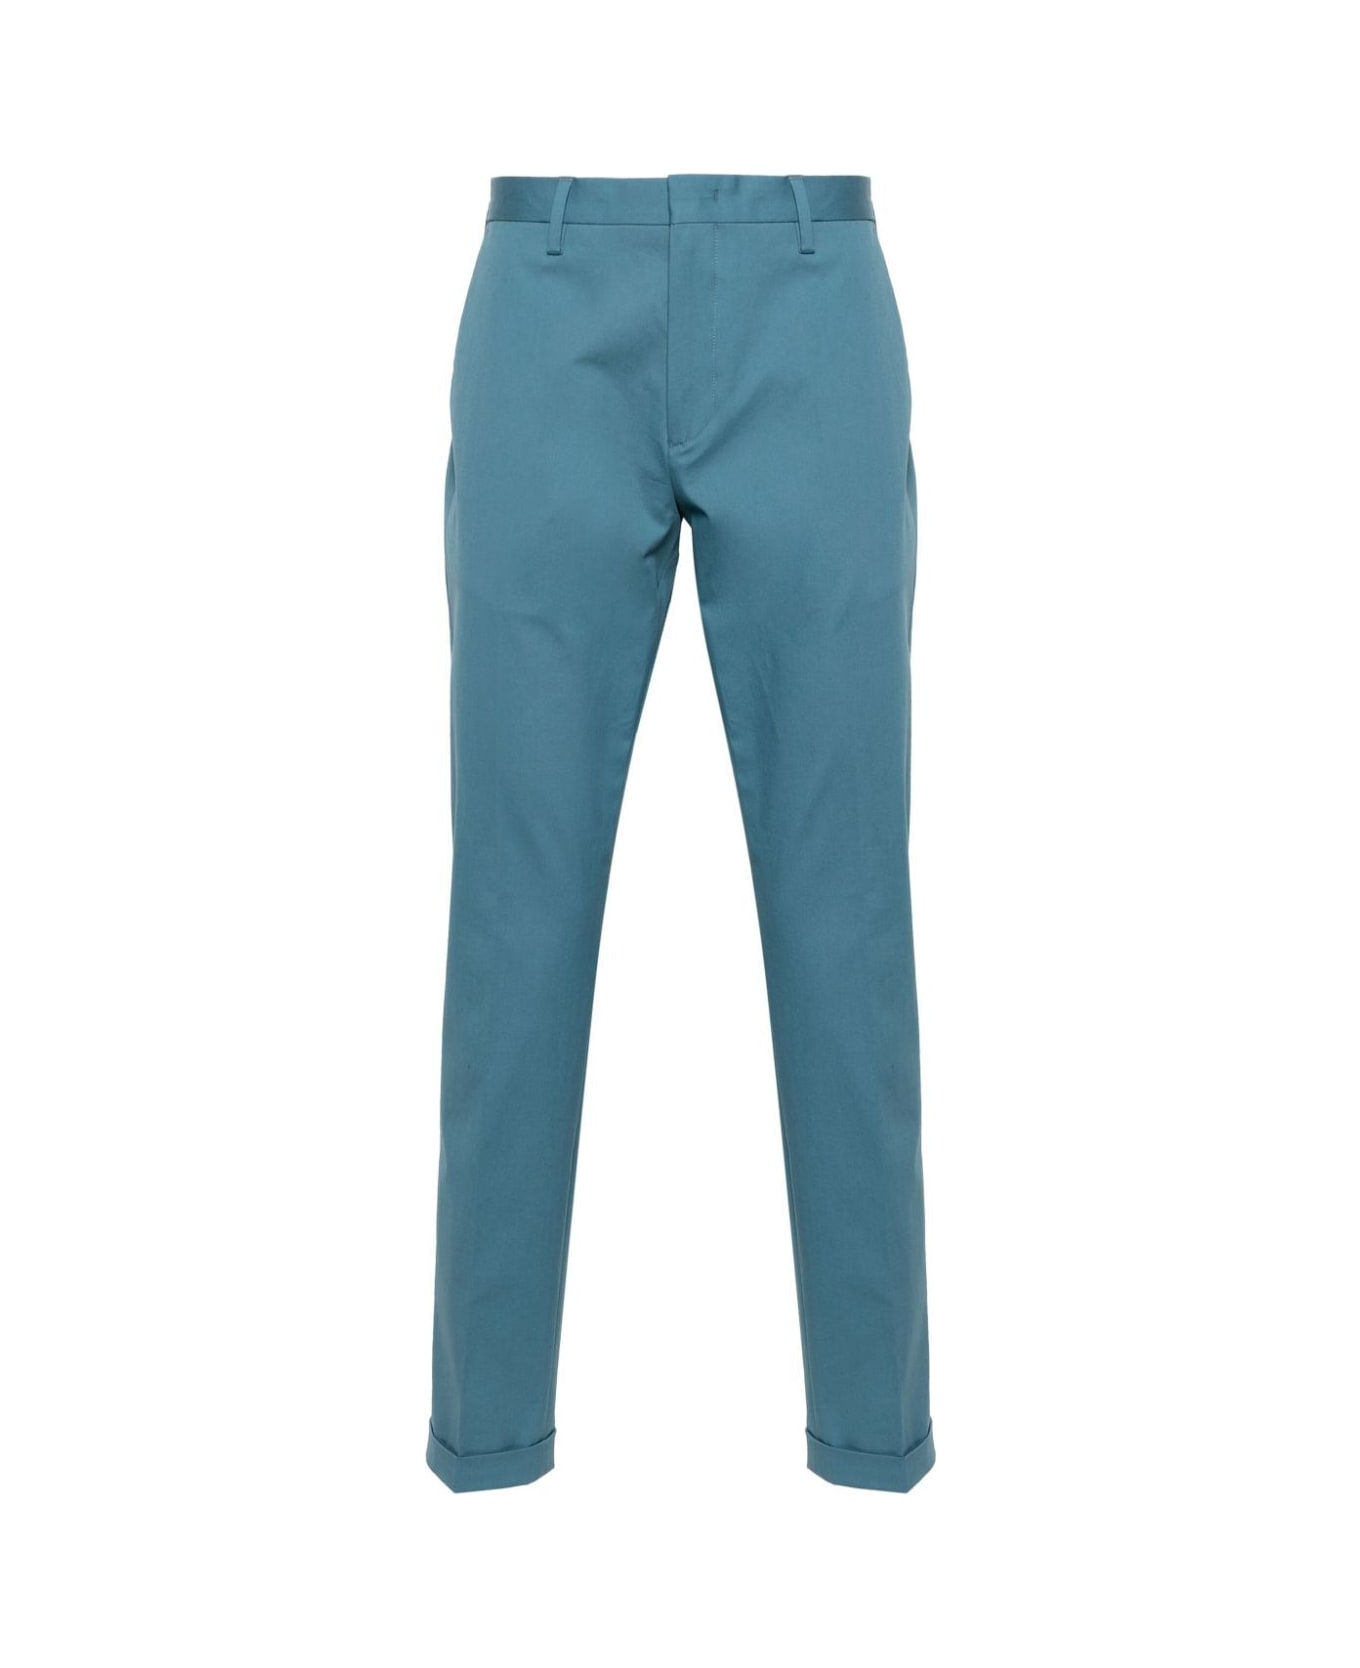 Paul Smith Mens Trousers - Pt Blue ボトムス